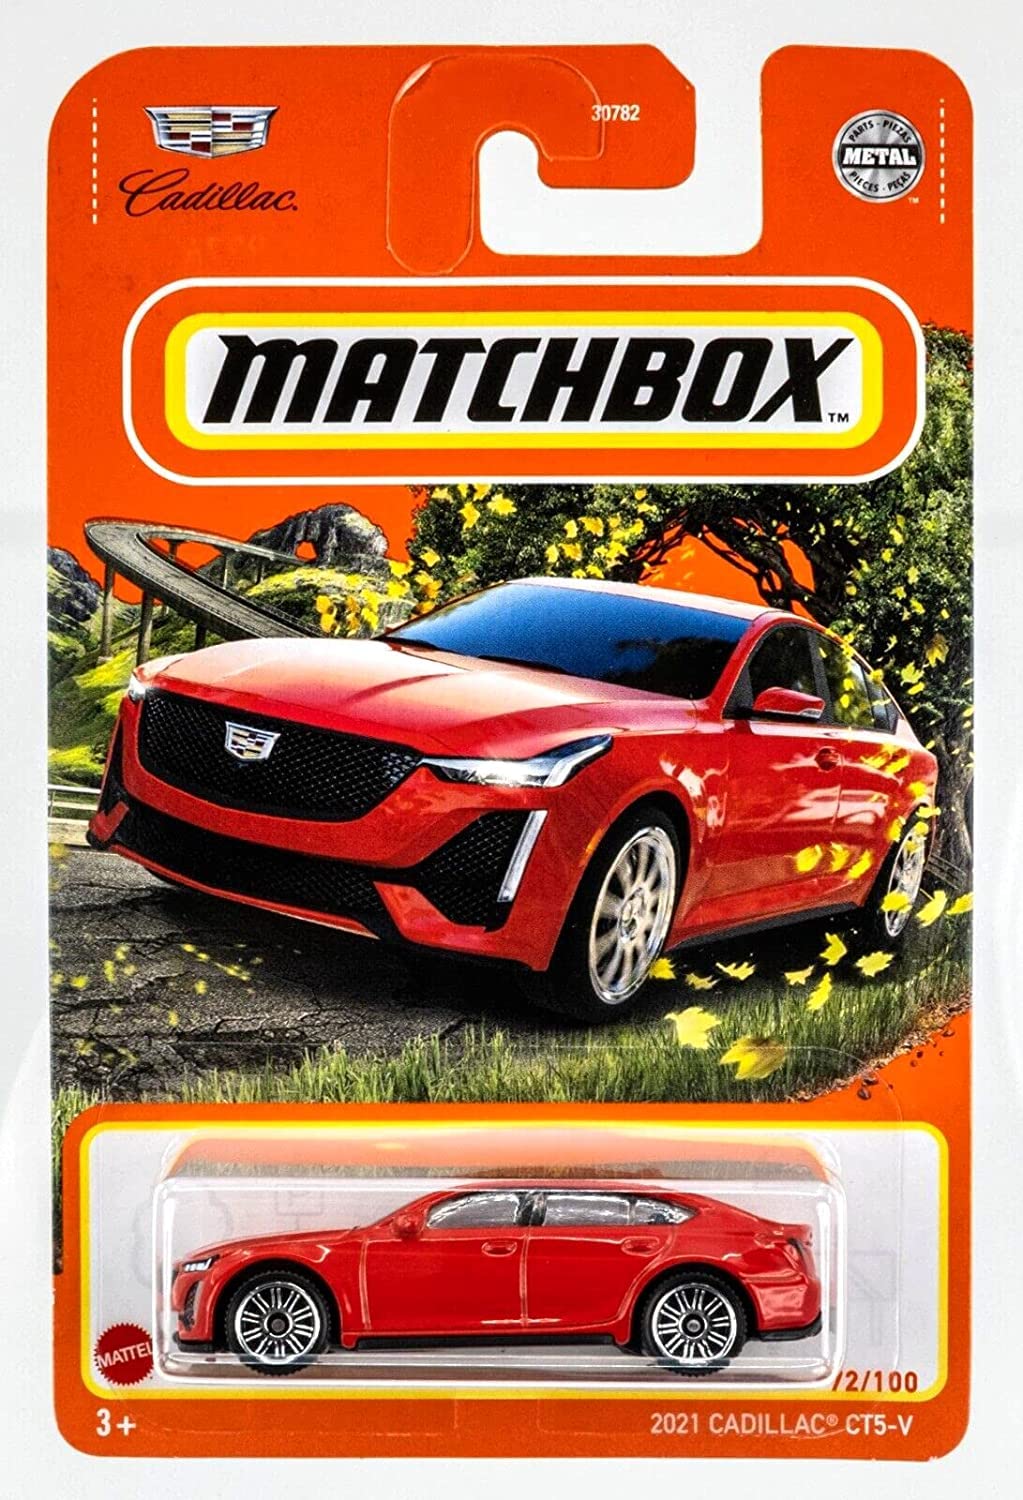 Matchbox 2022 - 2021 Cadillac CT5-V - Red - 72/100 - Ships Bubble Wrapped in a Box